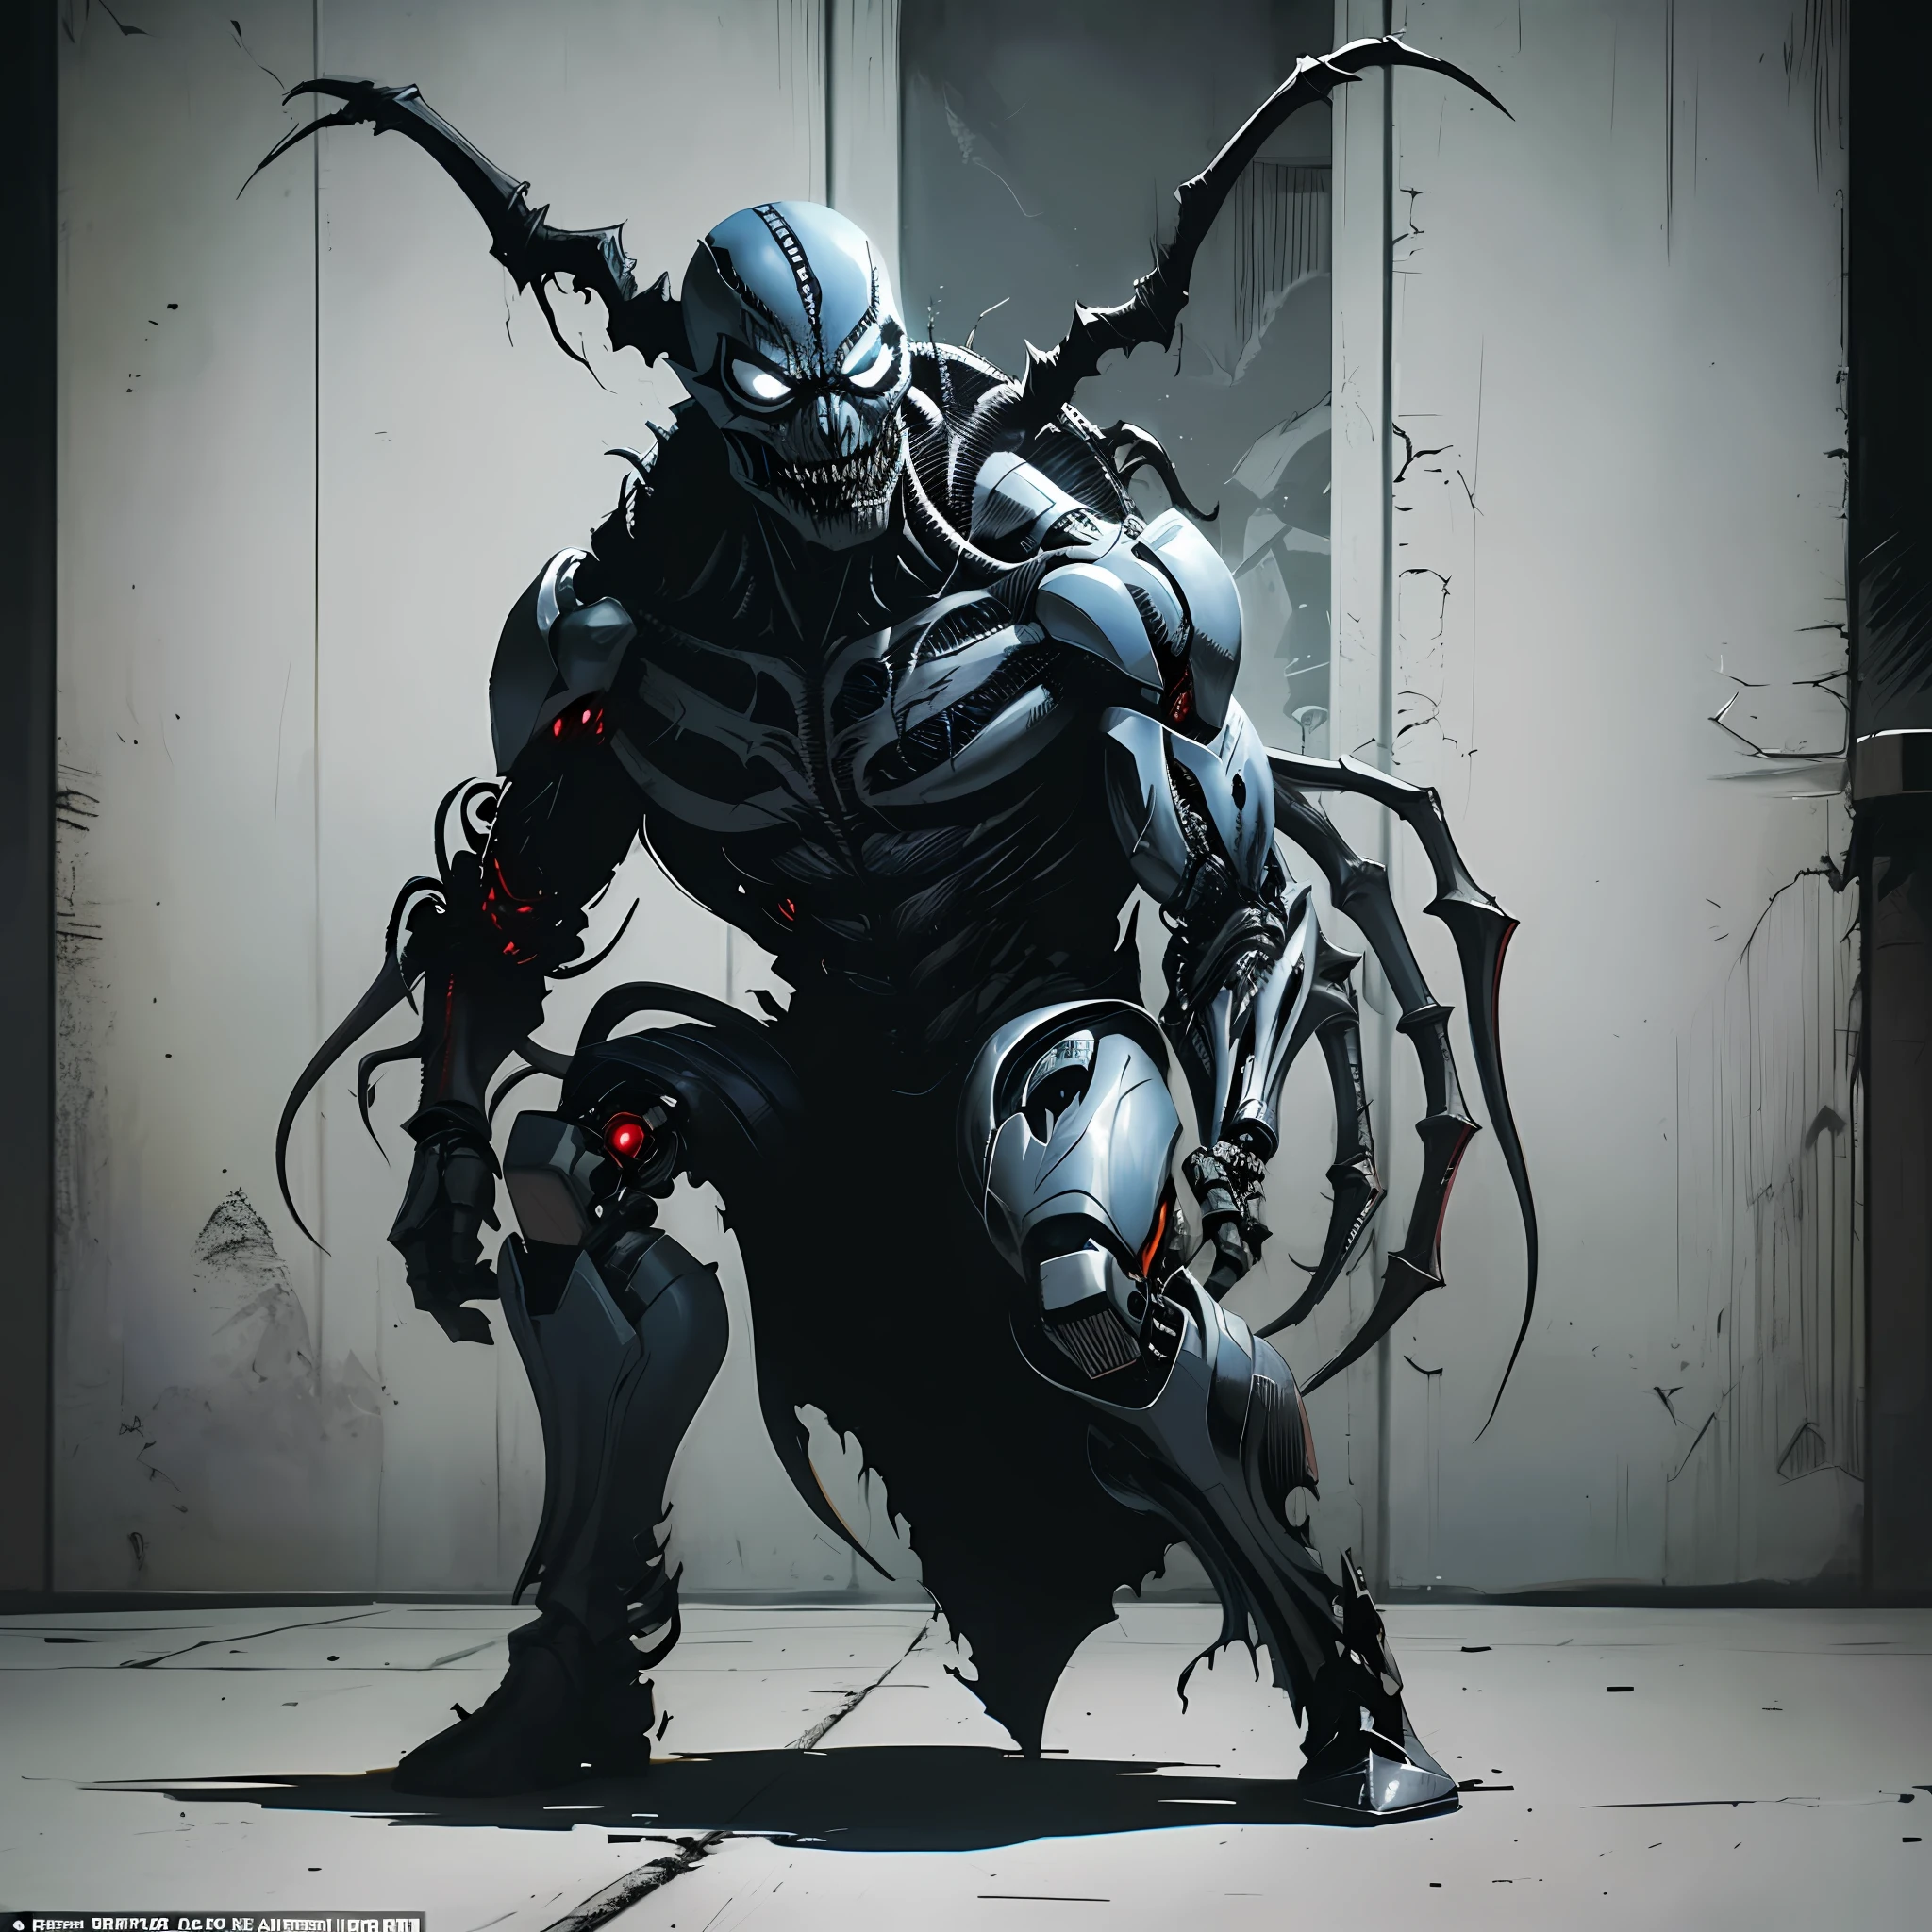 Sinister-looking Cyborg Demon Spawn infected with Venom Symbiote, inspired by Todd McFarlane's artwork, capturing the dark and gritty ambiance of Image Comics and DC Comics. Action-packed shot set in a battlefield, portraying a terrifying and villainous presence. Single character full body render, masterpiece